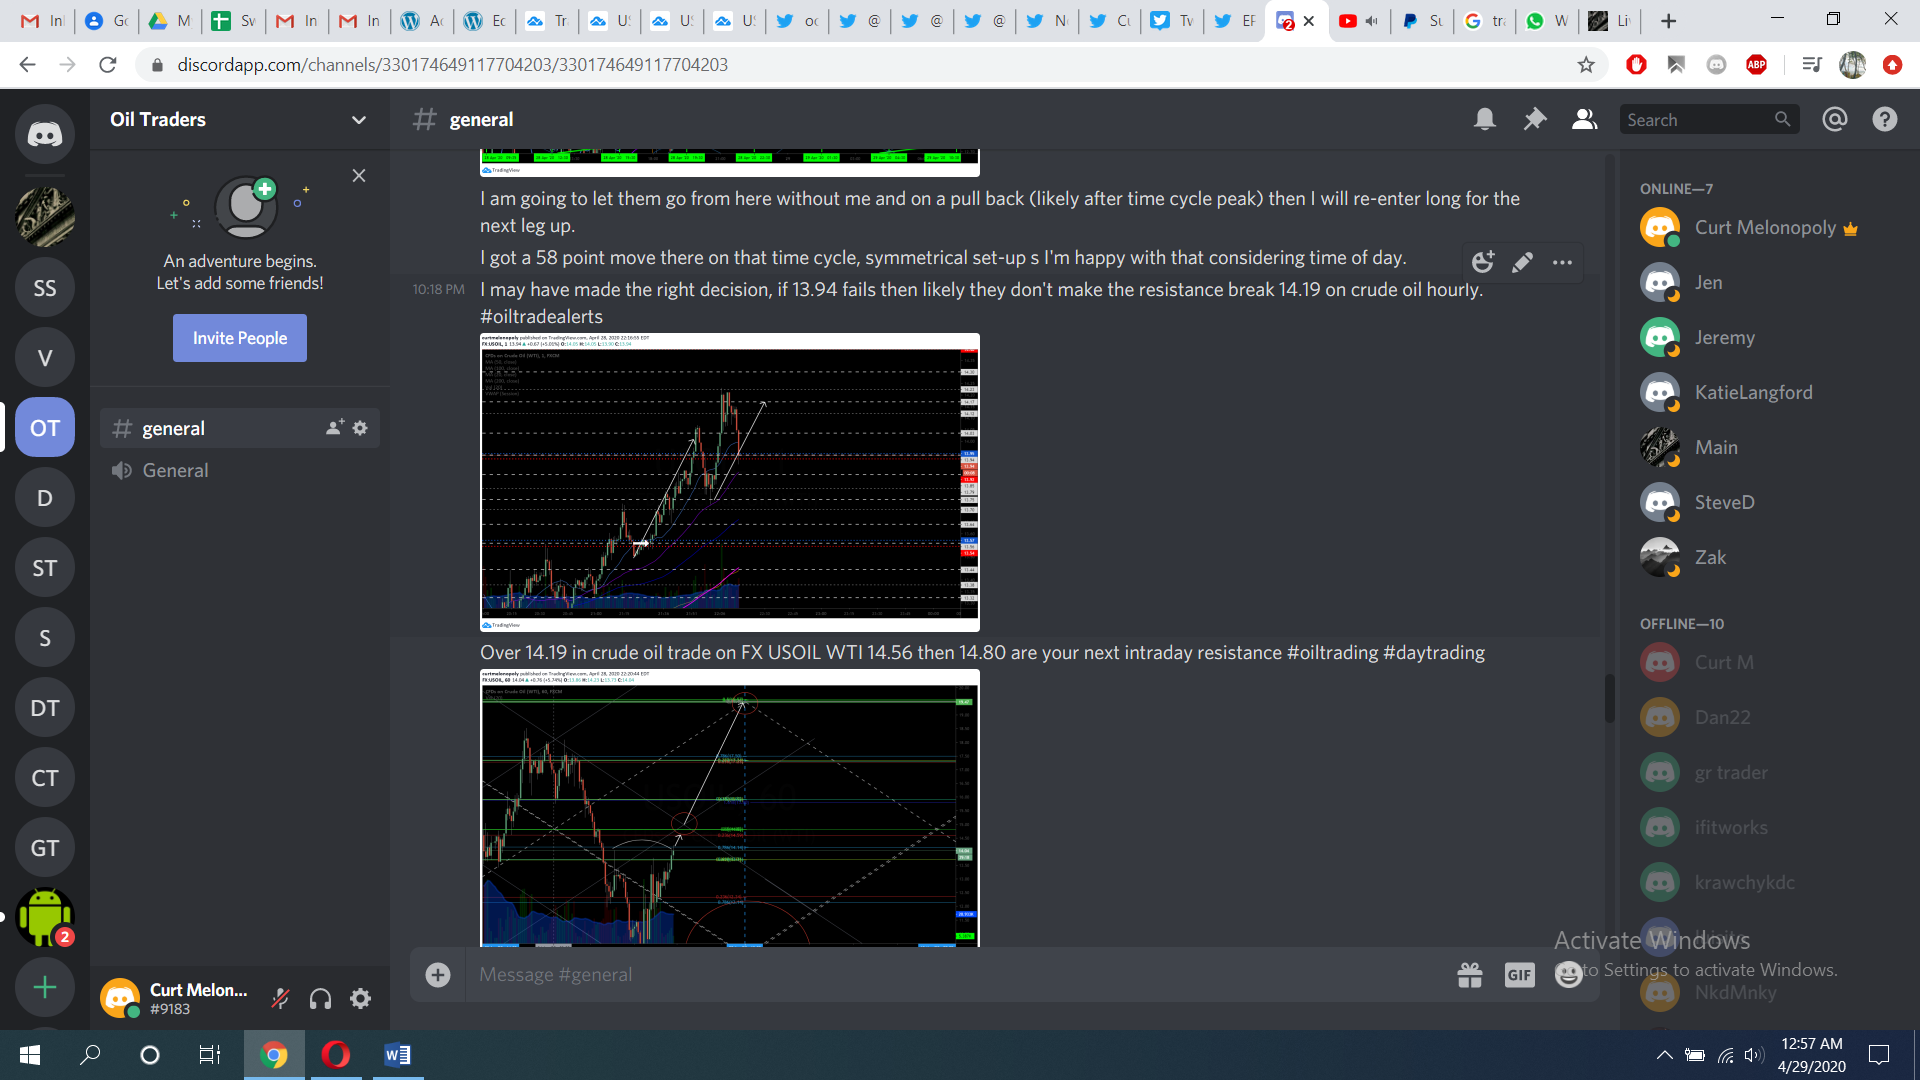 Screen shot image captured of actual oil trading room discussion from lead trader and guidance for trade plan #oiltraderoom